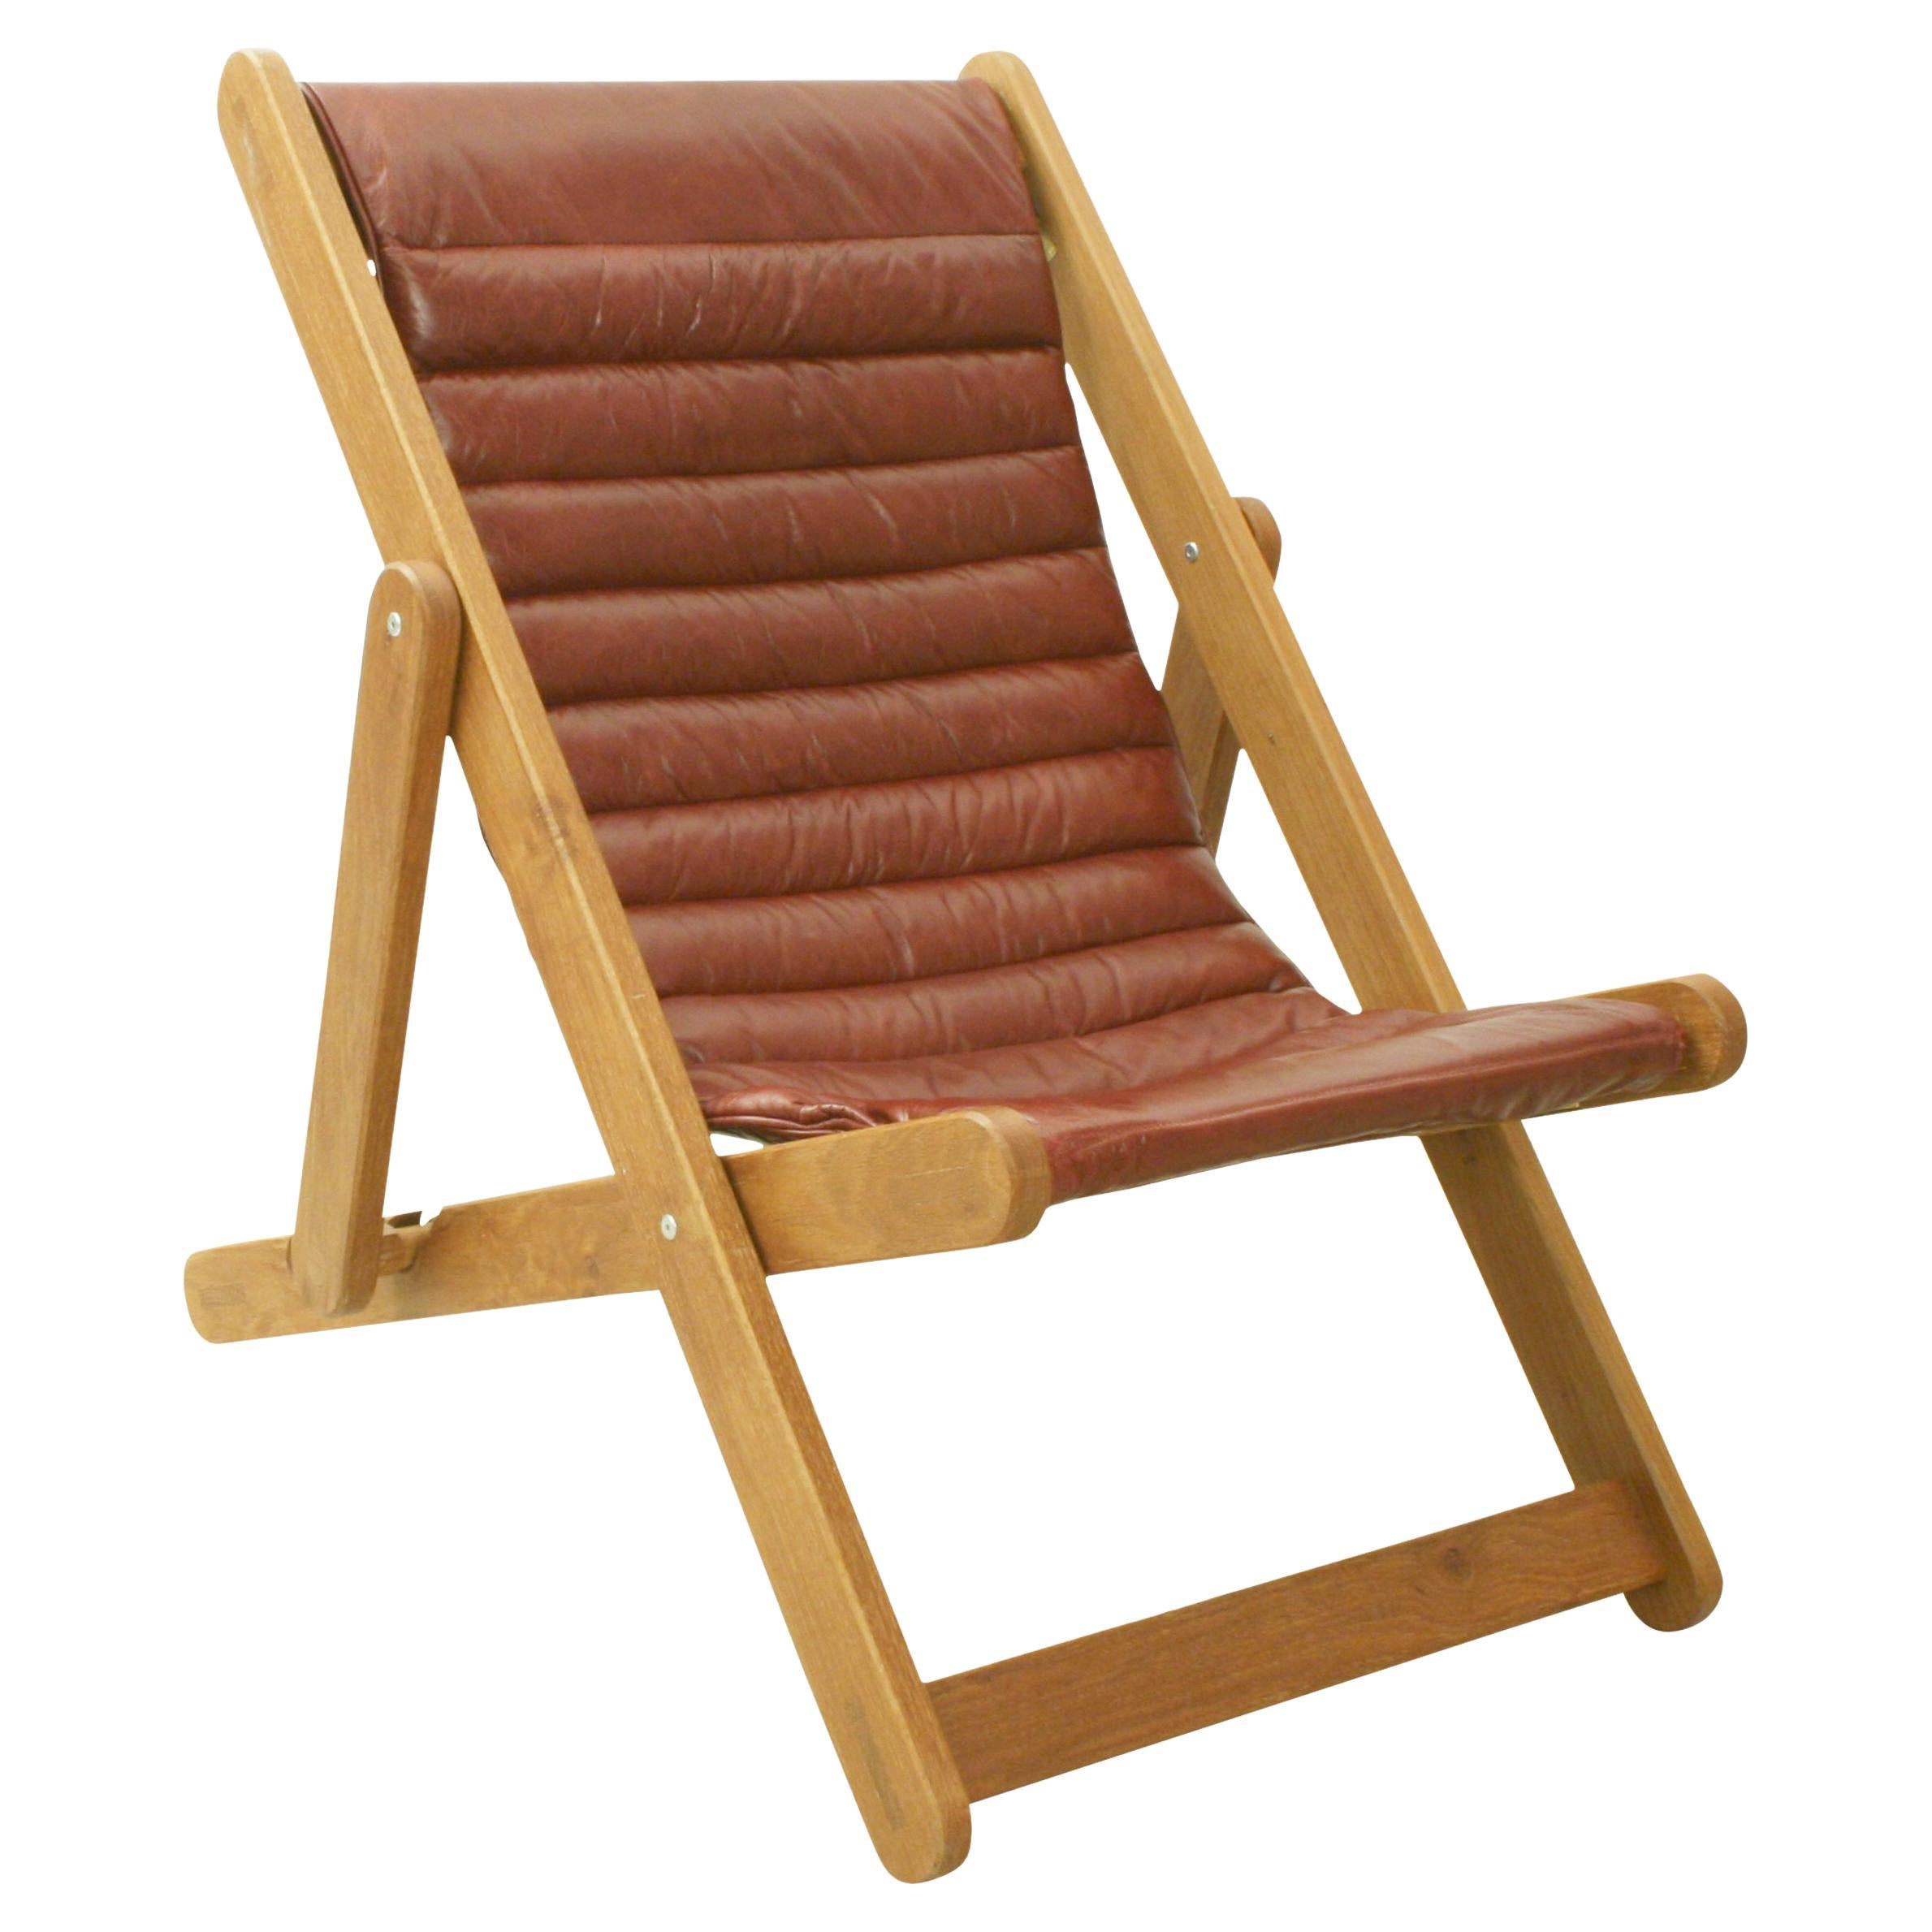 Leather and Oak Deck Chair, Library Chair.